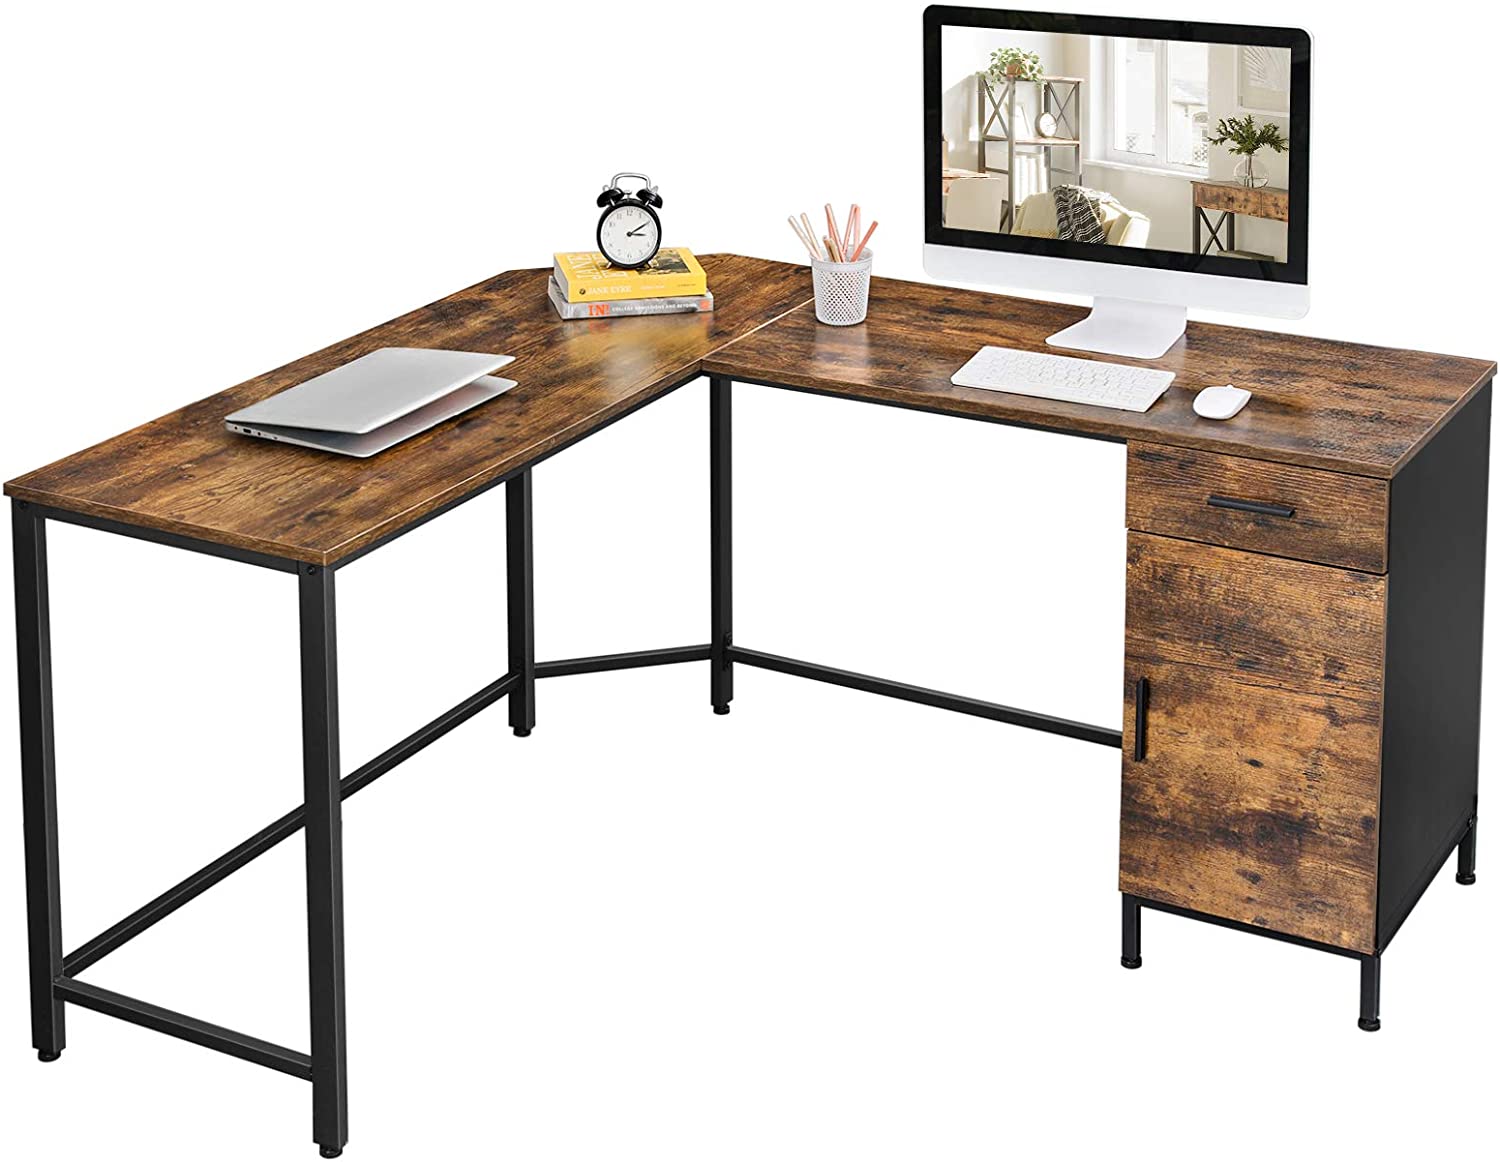 

L-Shaped Computer Desk with Cabinet and Drawer, Corner Desk, Study, Home Office, Space-Saving, Steel, Industrial, 53.9 x 59.1 x 29.5 Inches, Rustic Brown and Black